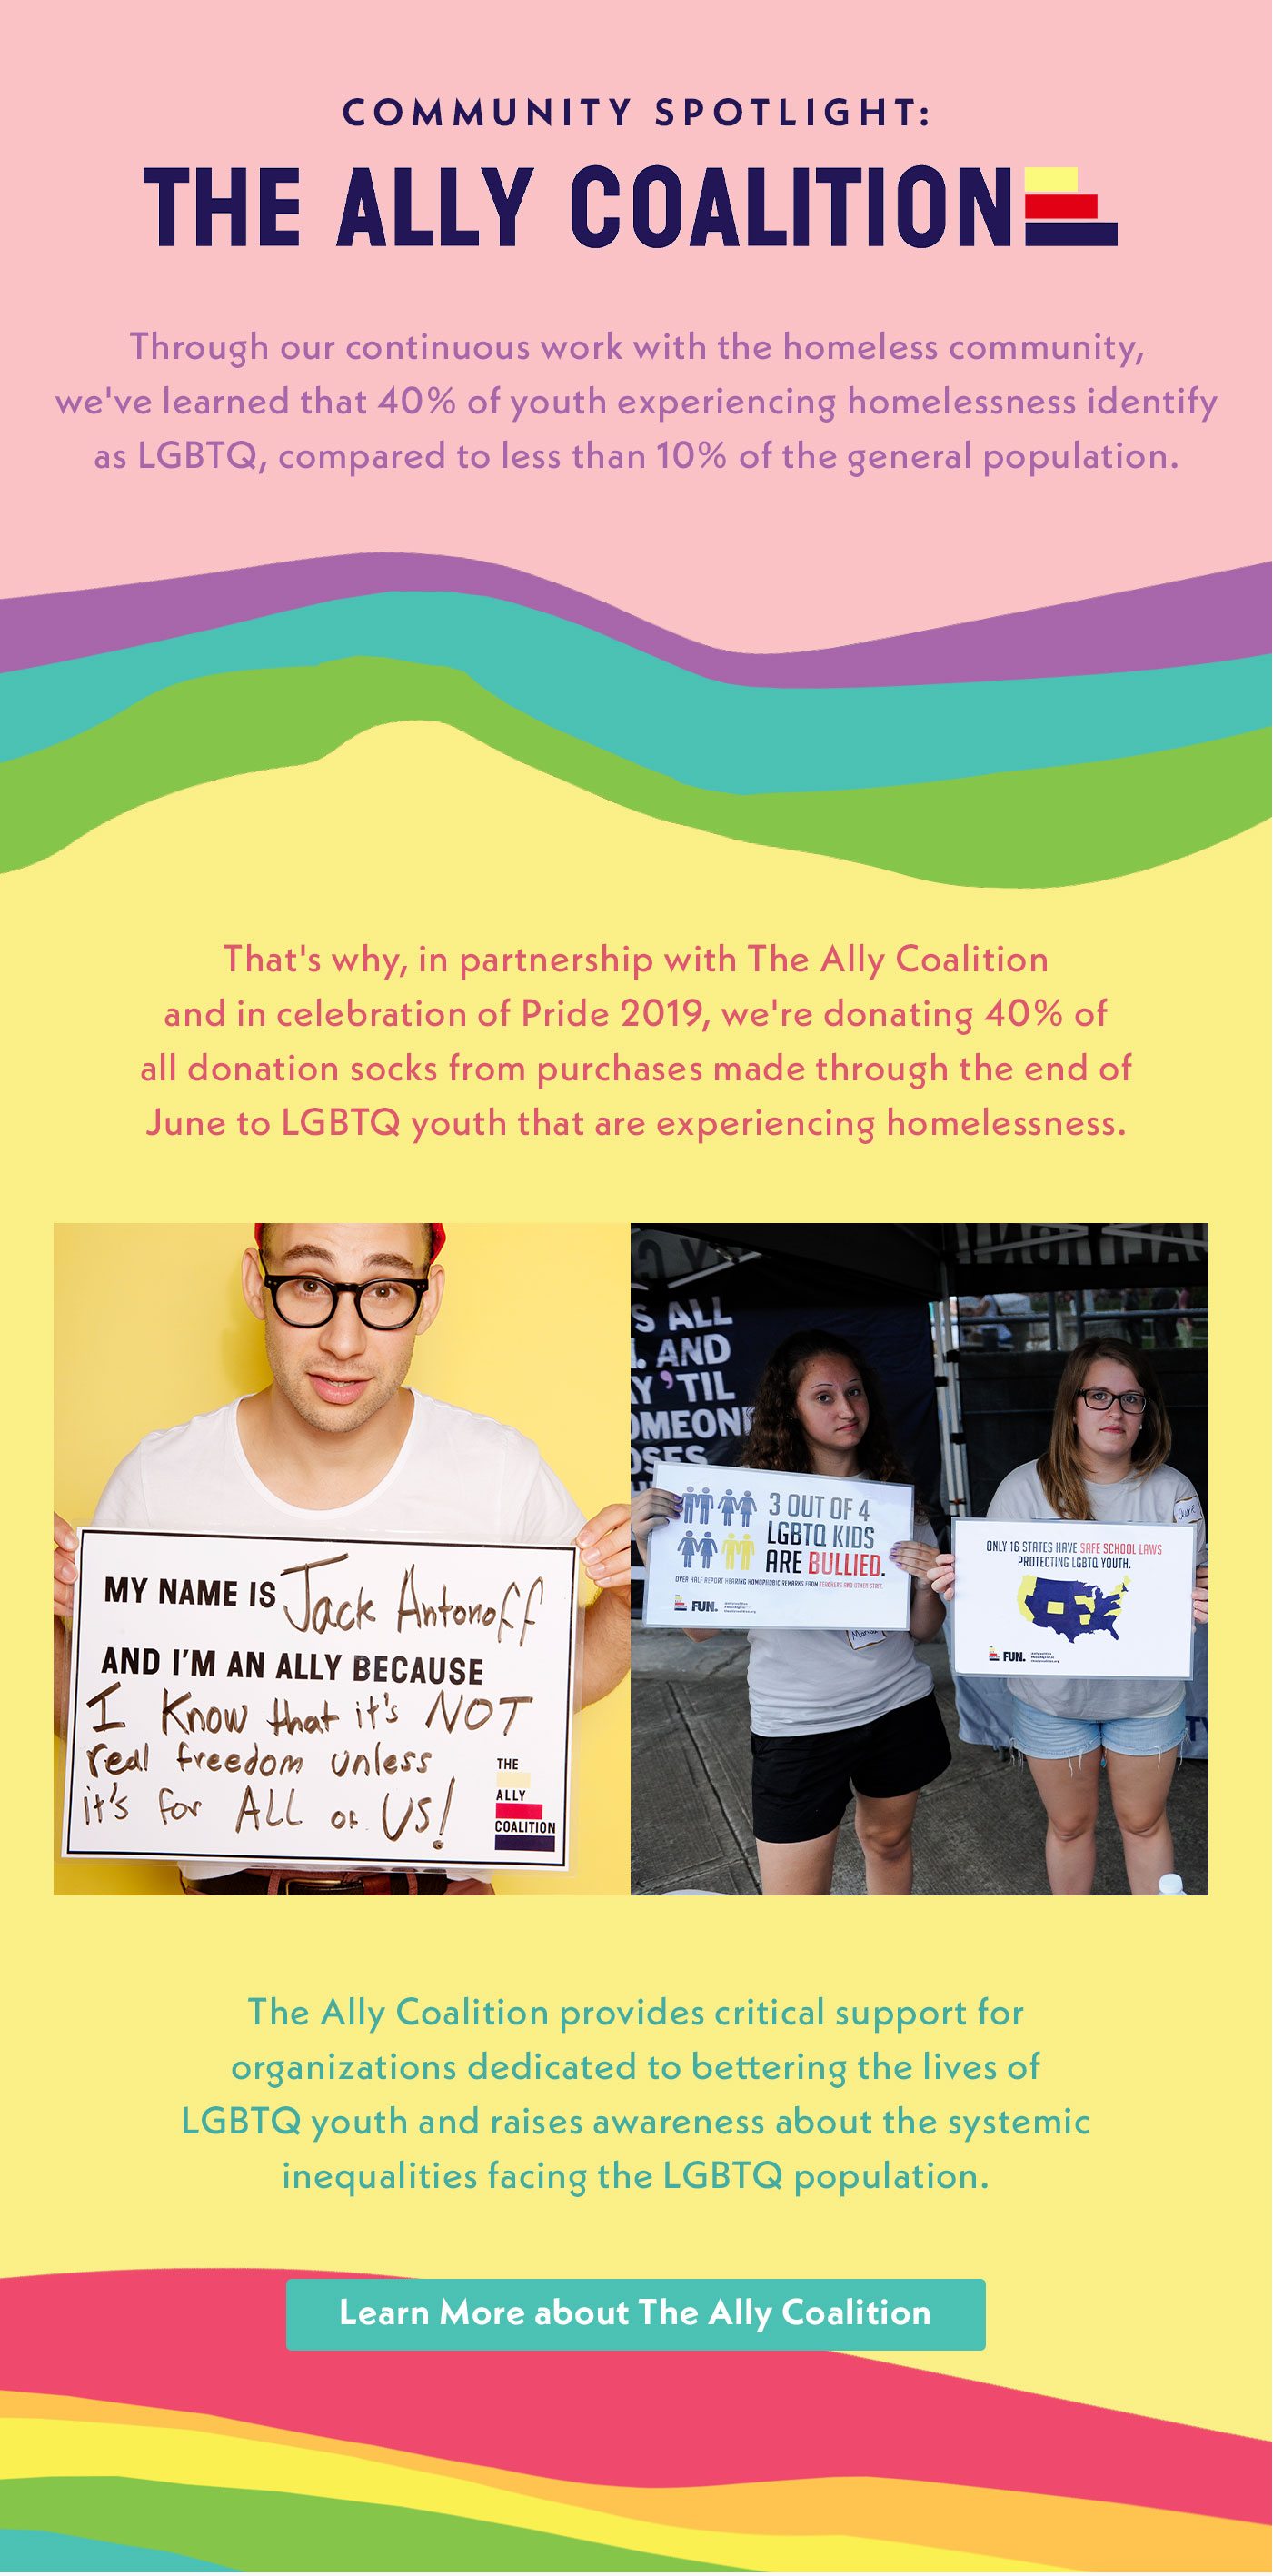 Community Spotlight: The Ally Coalition | Through our continuous work with the homeless community, we've learned that 40% of youth experiencing homelessness identify as LGBTQ, compared to less than 10% of the general population. That's why, in partnership with The Ally Coalition and in celebration of Pride 2019, we're donating 40% of all donation socks from purchases made through the end of June to homeless LGBTQ youth. The Ally Coalition provides critical support for organizations dedicated to bettering the lives of LGBTQ youth and raises awareness about the systemic inequalities facing the LGBTQ population. | Learn More about The Ally Coalition